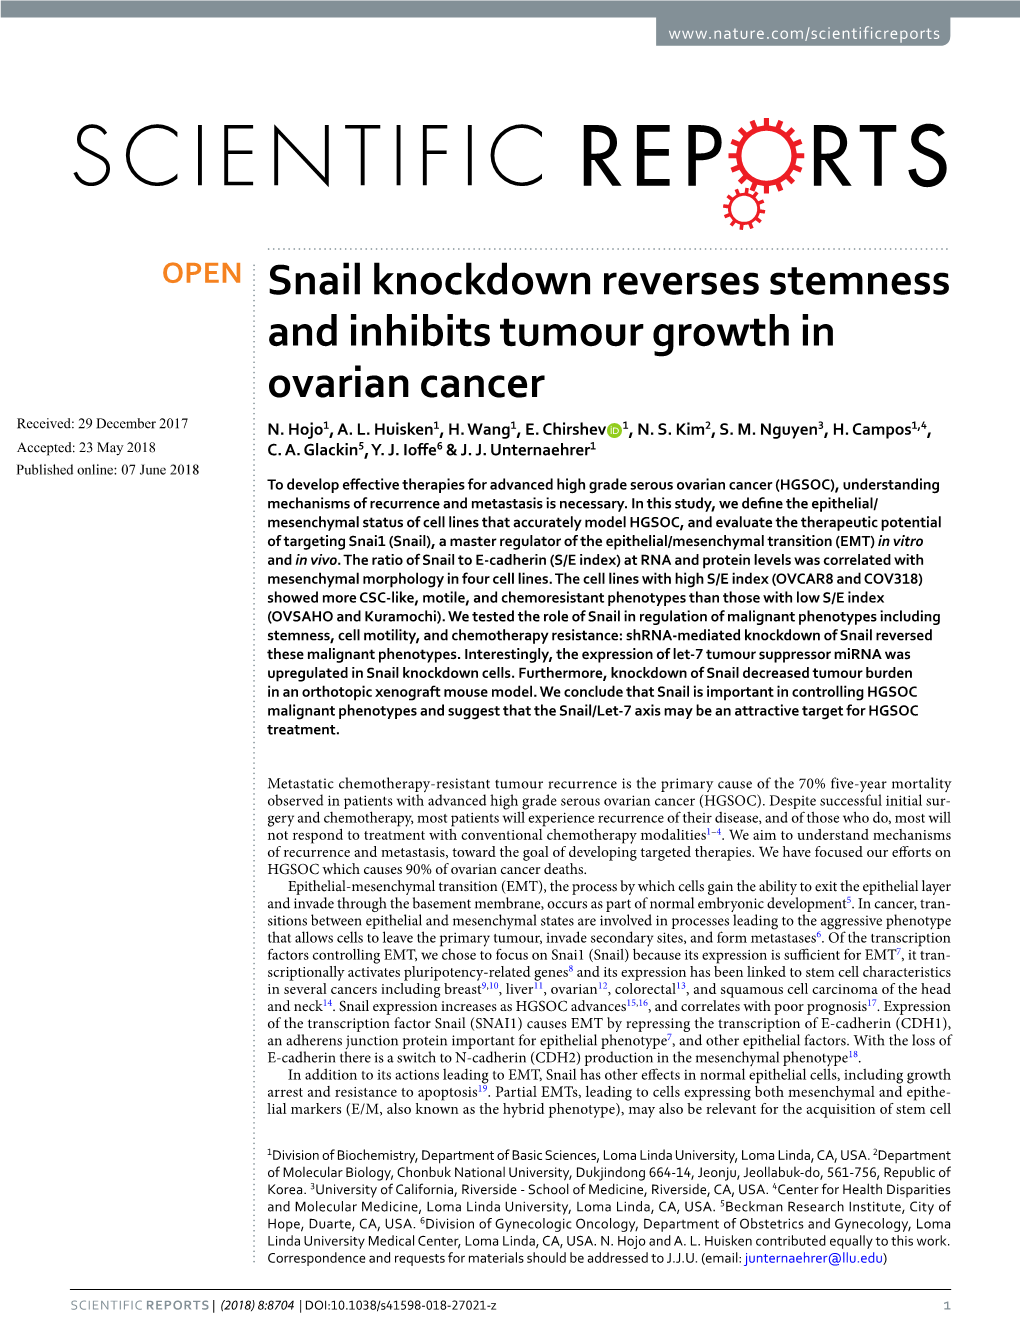 Snail Knockdown Reverses Stemness and Inhibits Tumour Growth in Ovarian Cancer Received: 29 December 2017 N